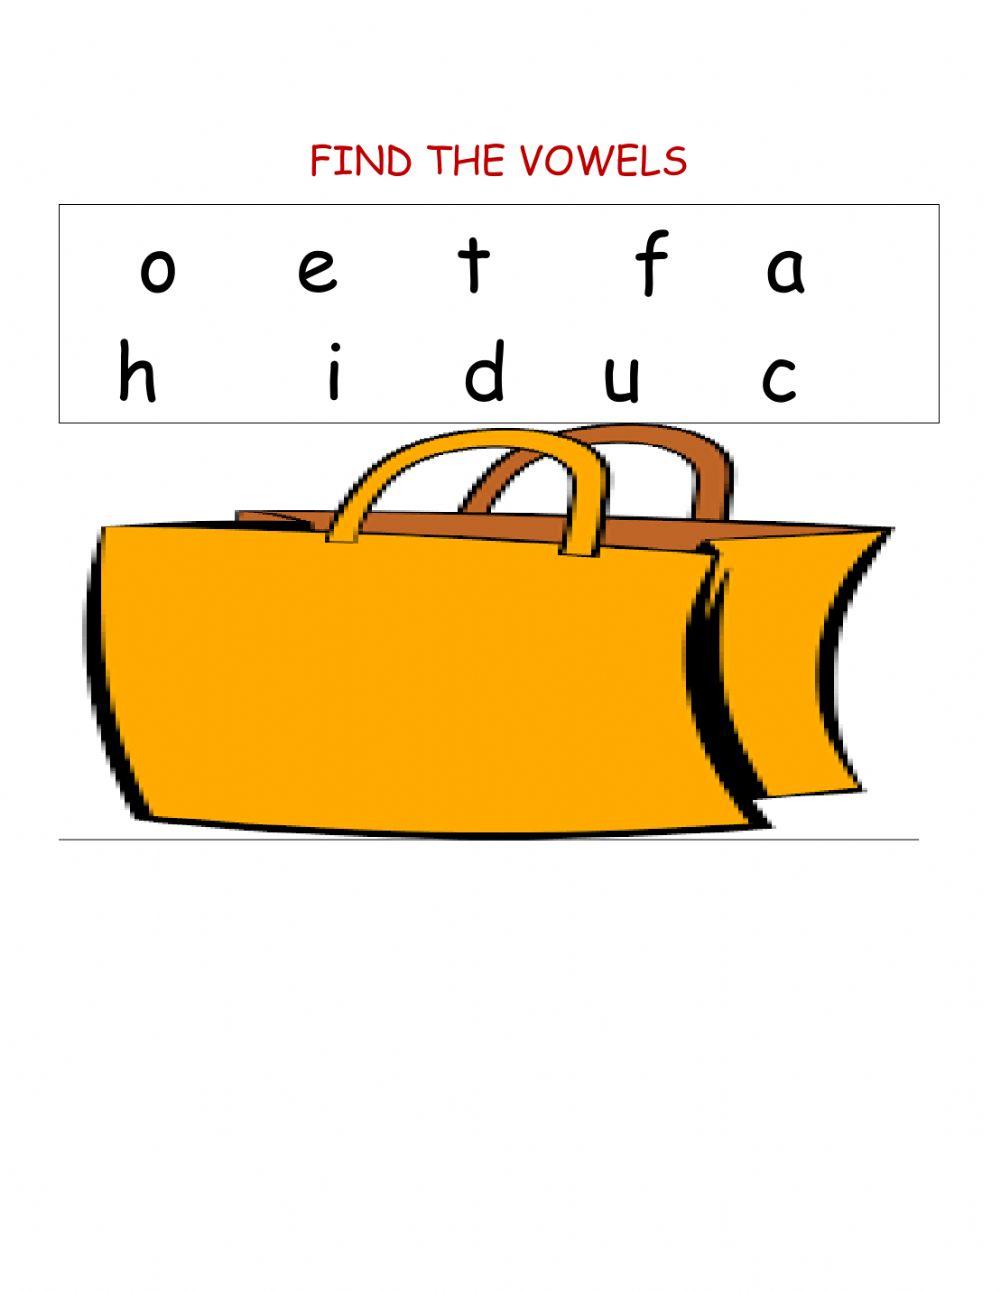 Consonants and vowels